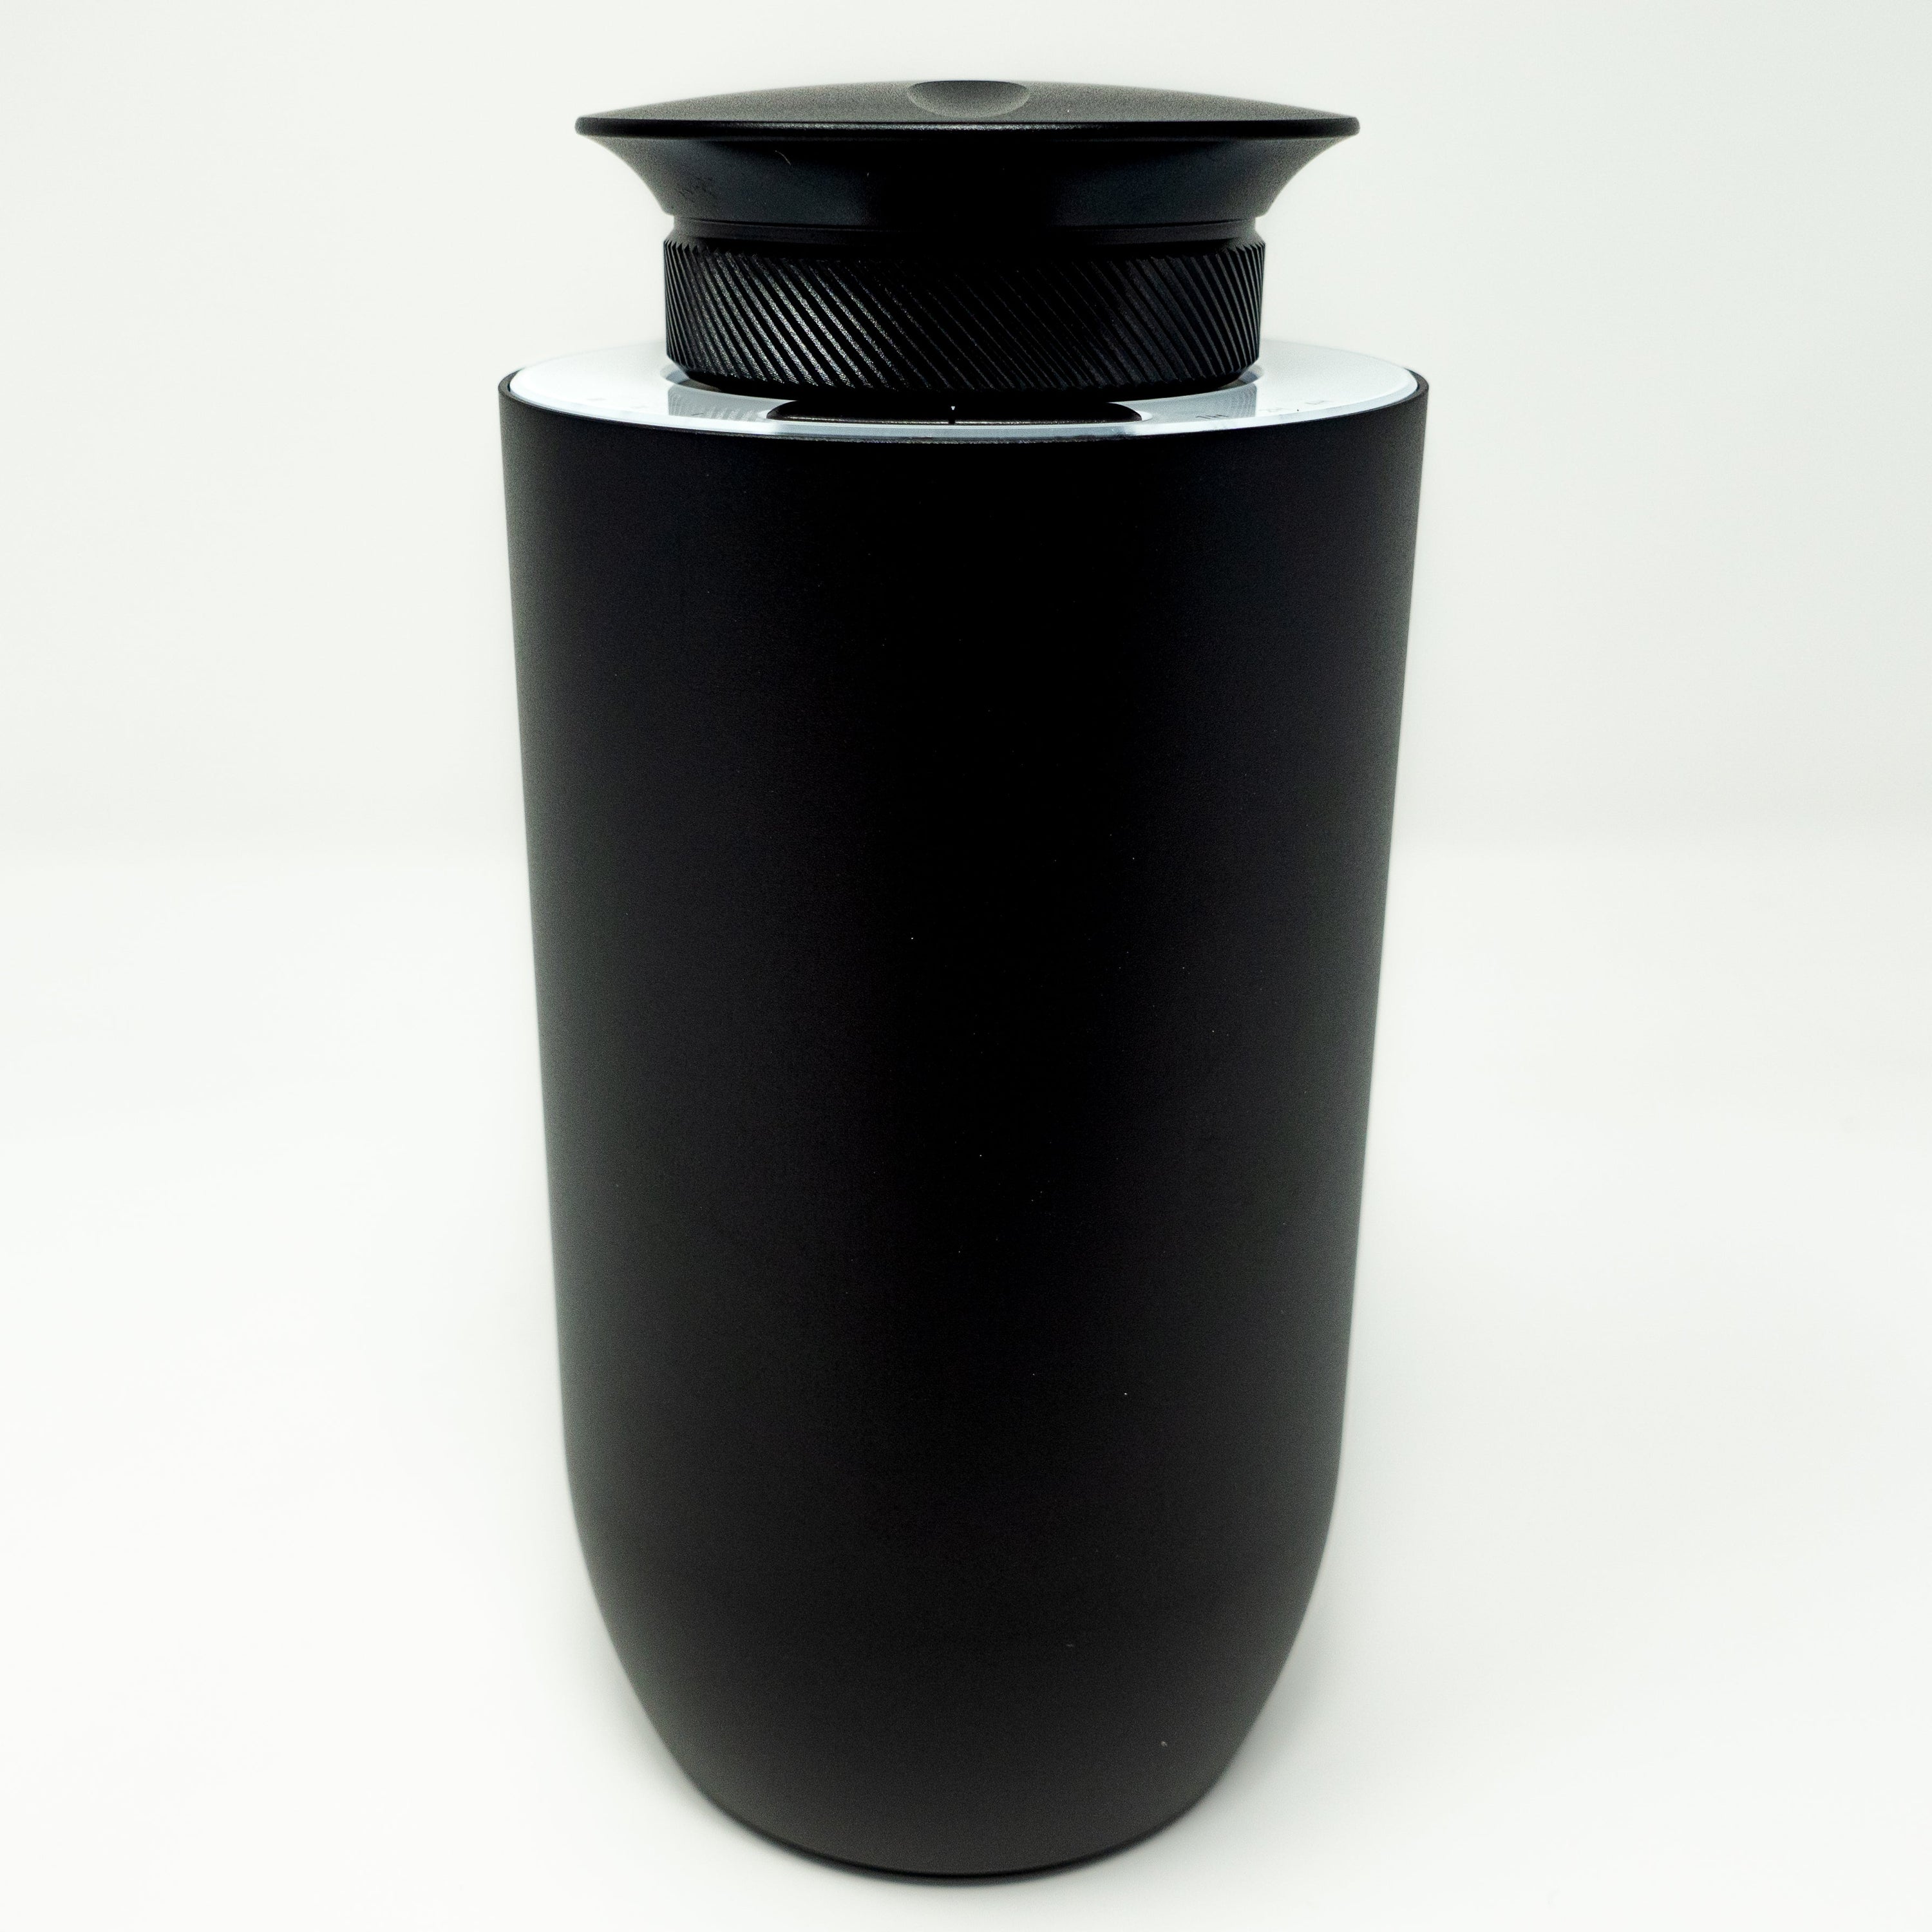 Portable Rechargeable Waterless Cold-Air Scent Diffuser - 10ml Capacity Color: Black